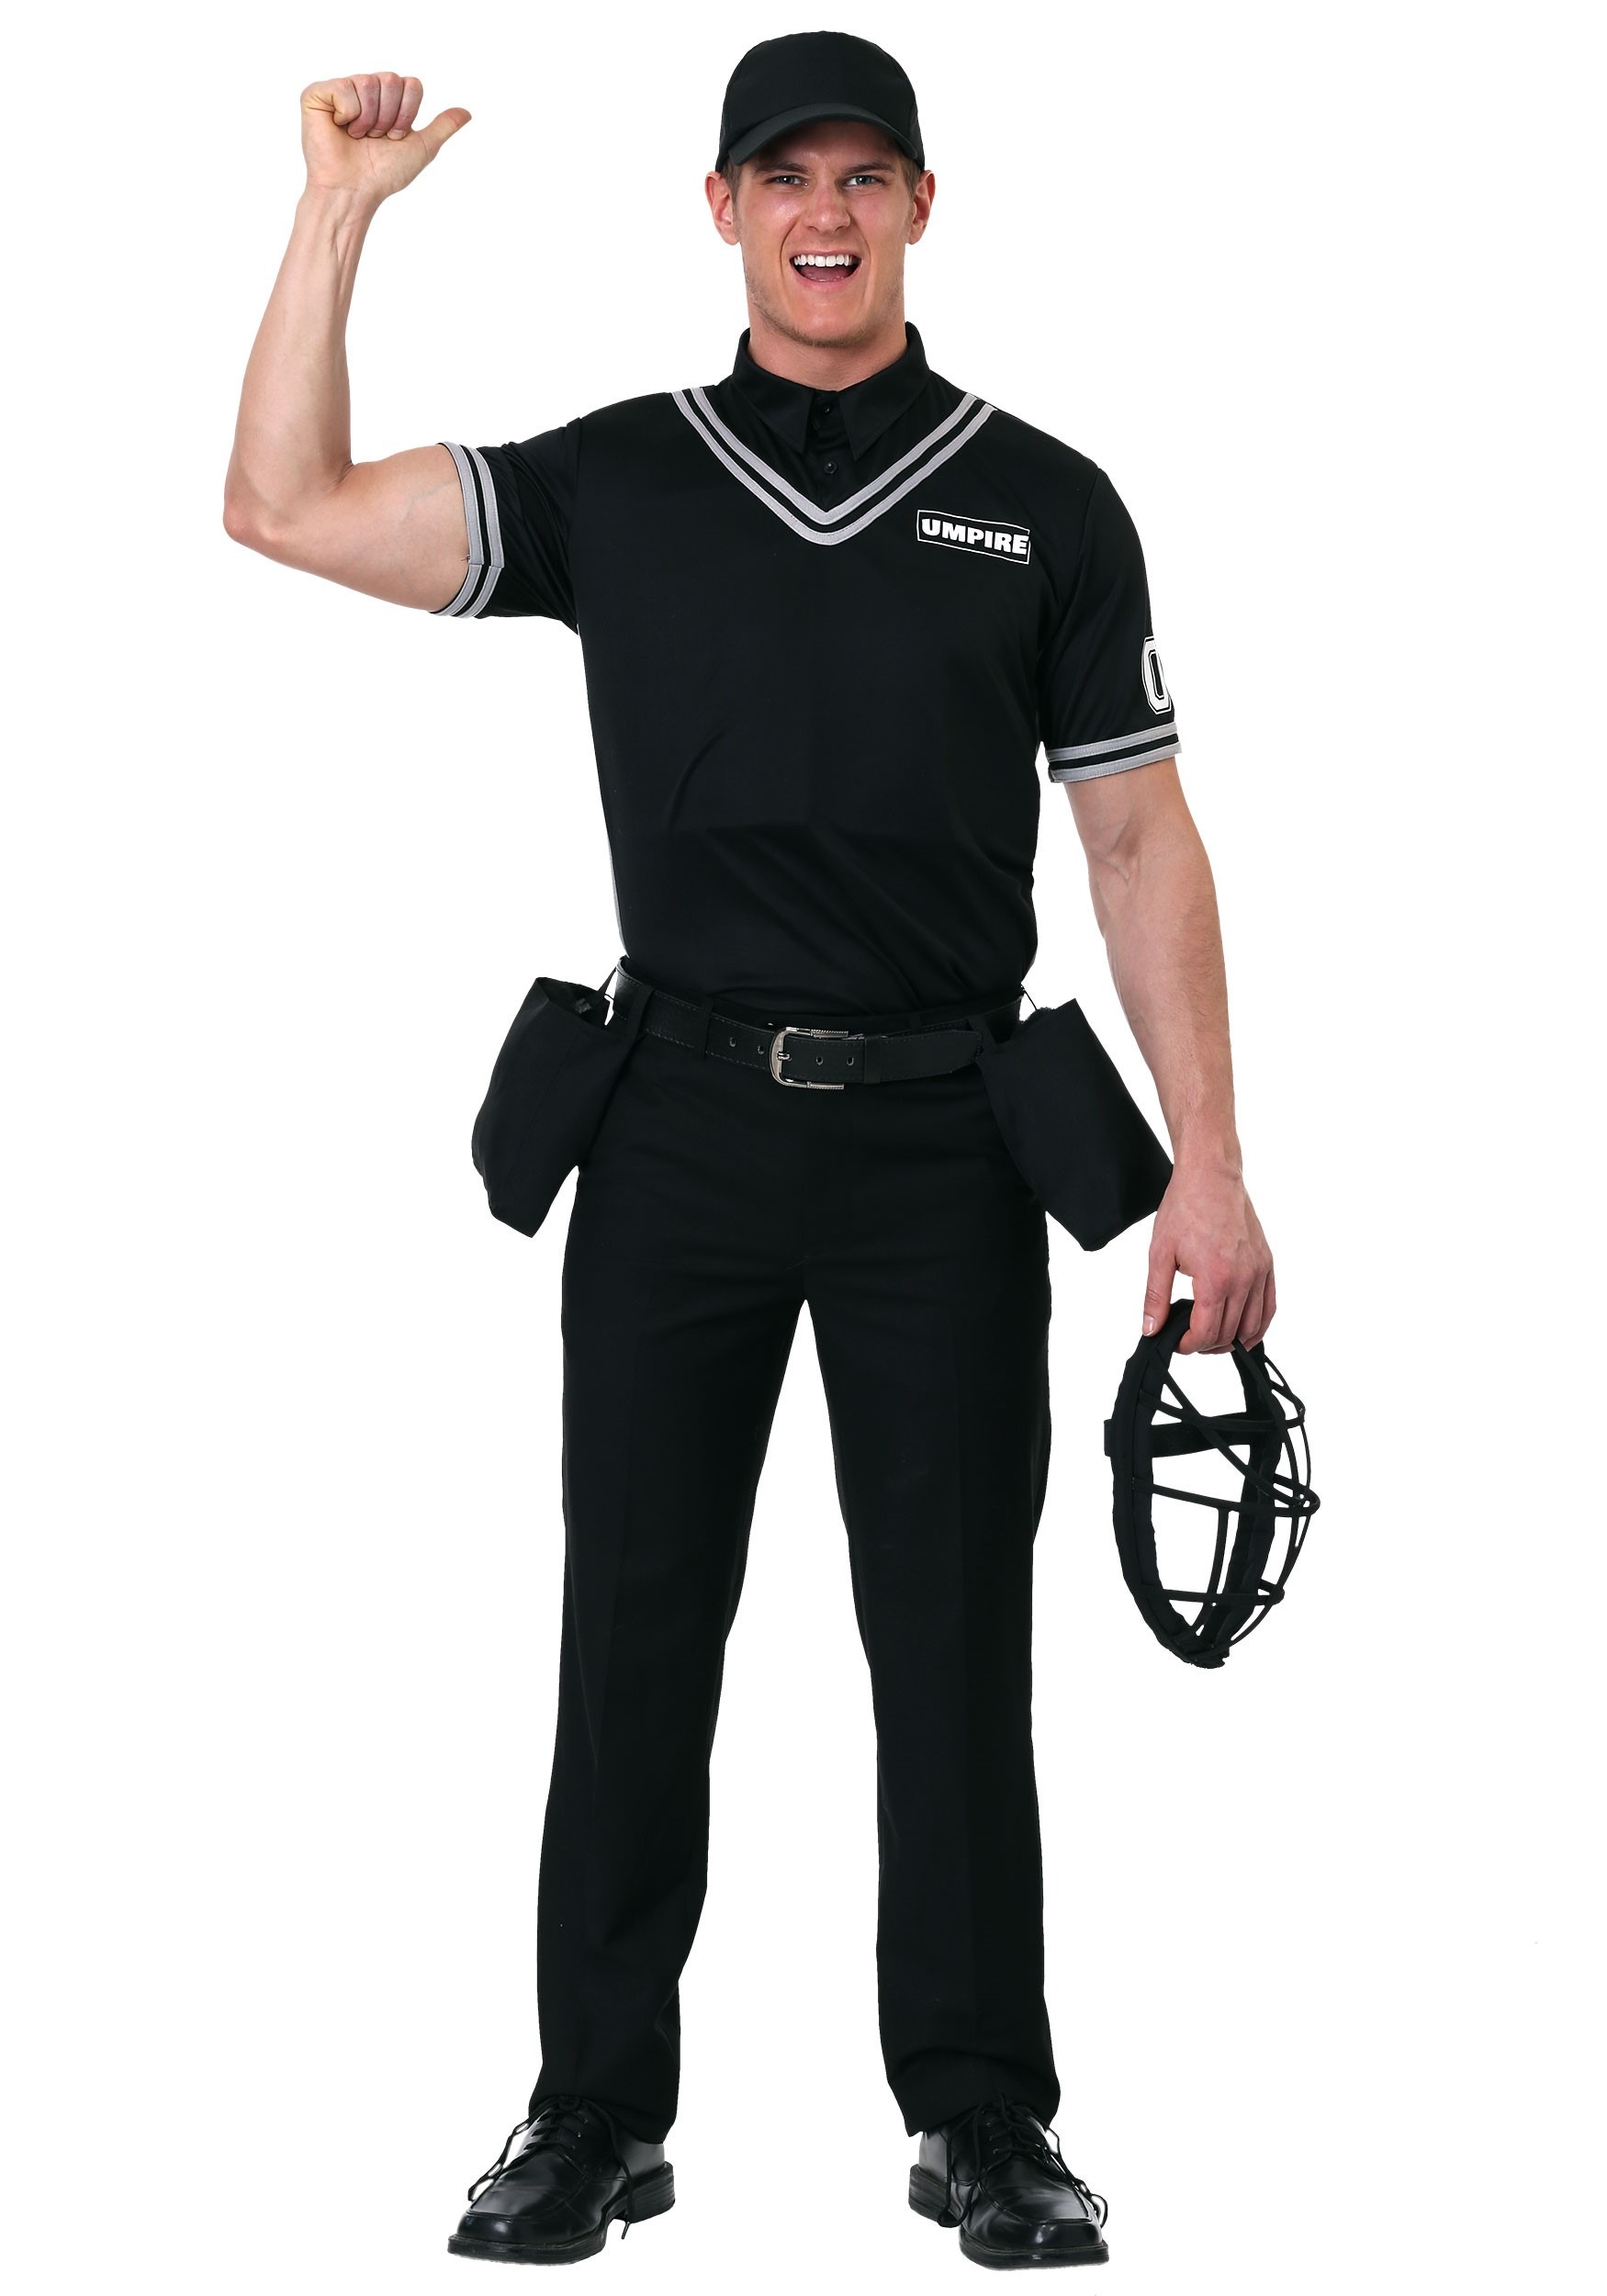 Men's You're Out Umpire Costume